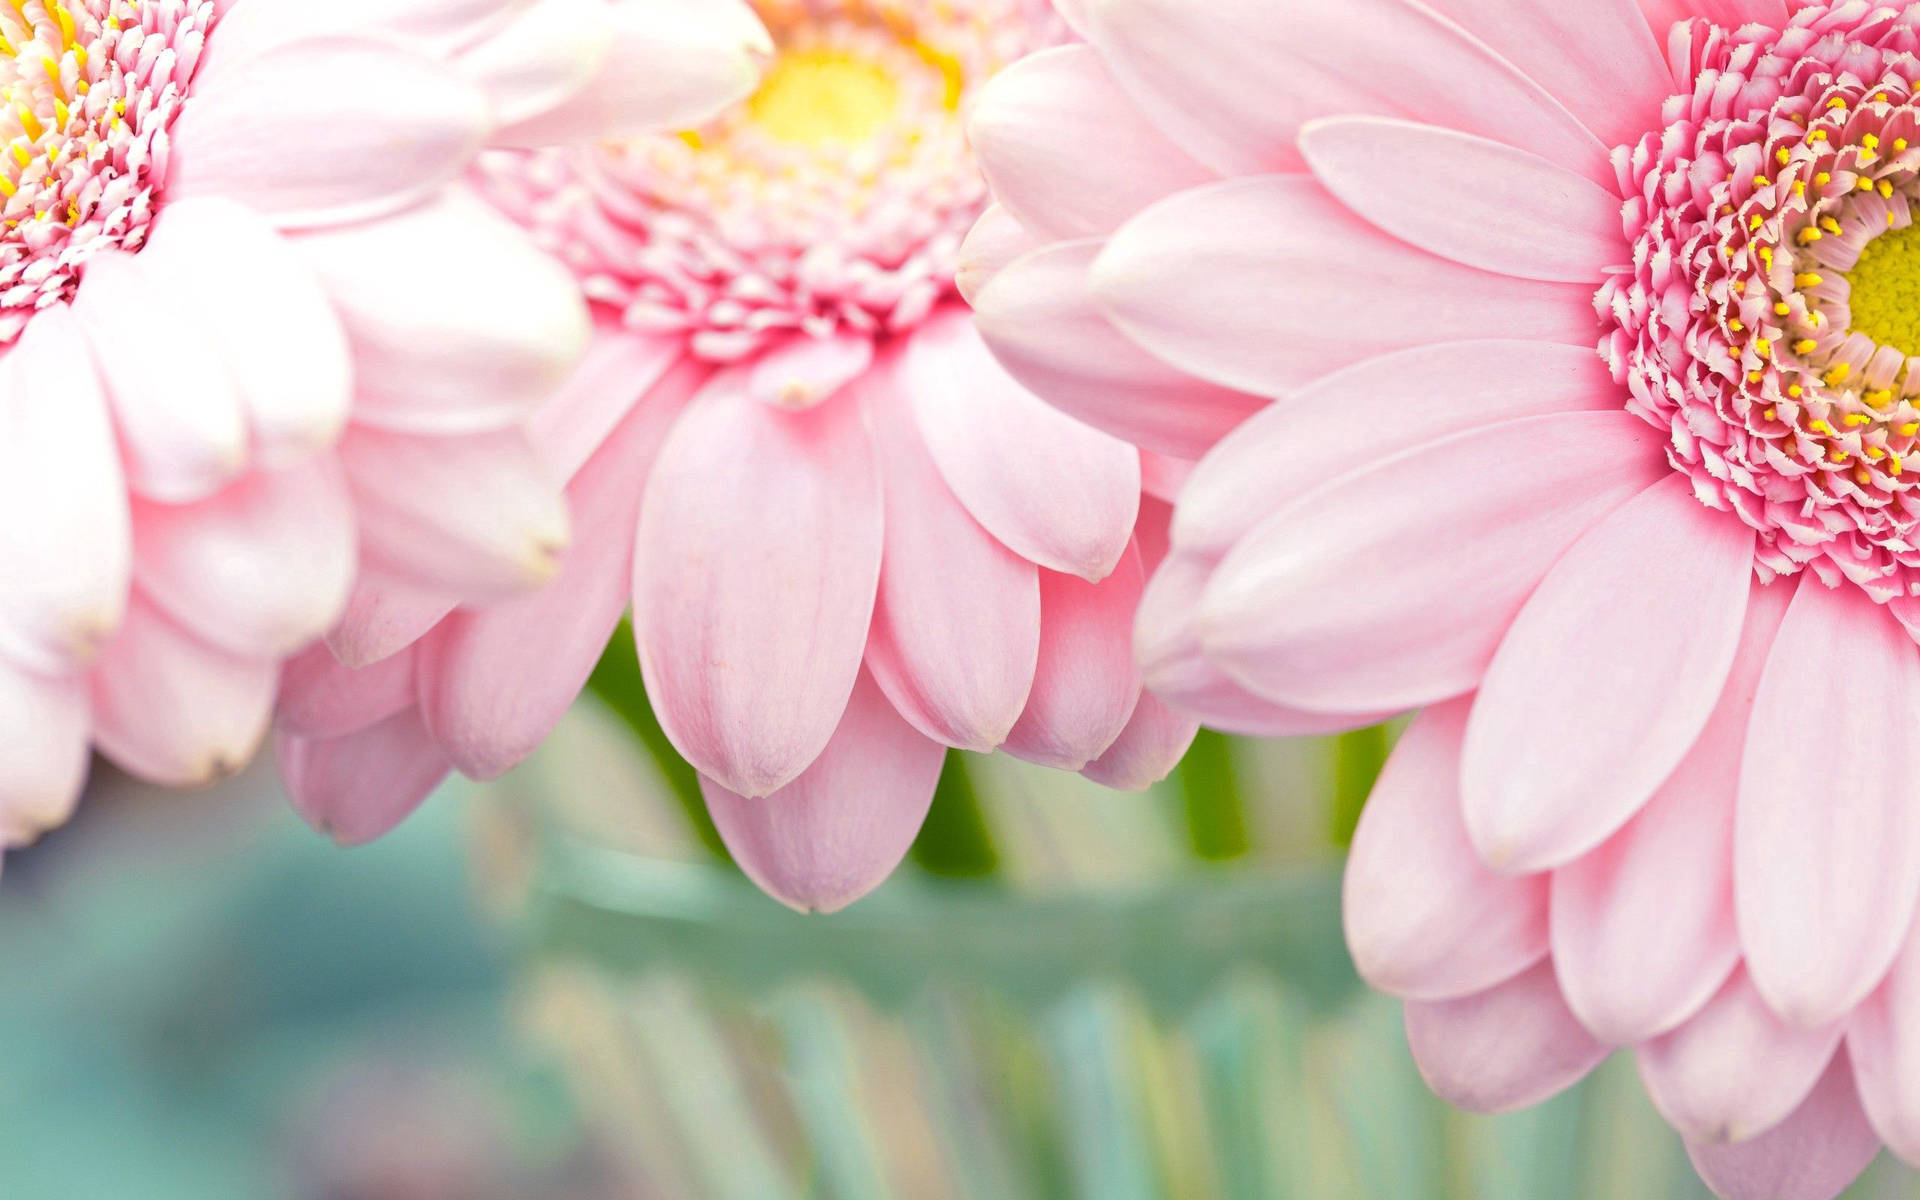 Light up your life with this beautiful pastel pink flower Wallpaper